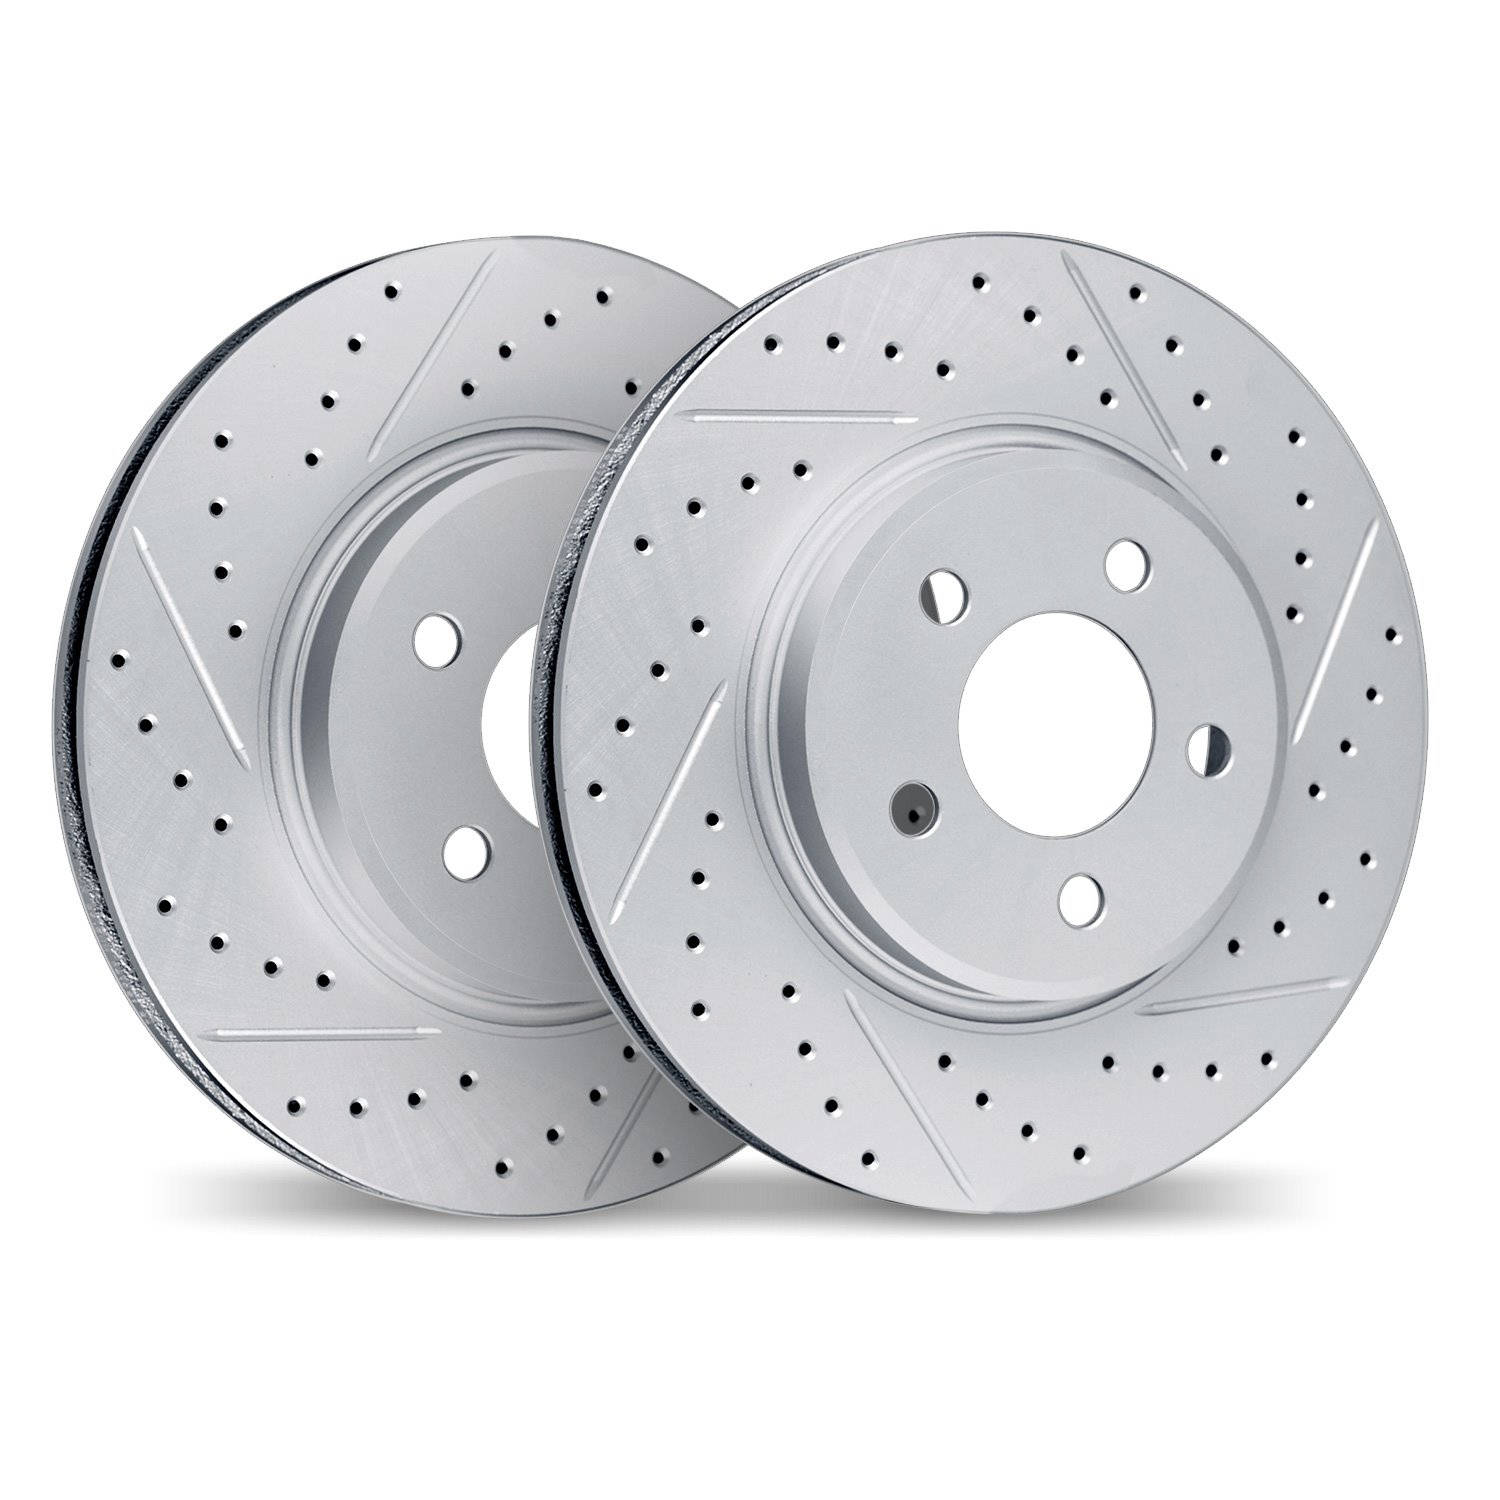 2002-11100 Geoperformance Drilled/Slotted Brake Rotors, Fits Select Land Rover, Position: Rear